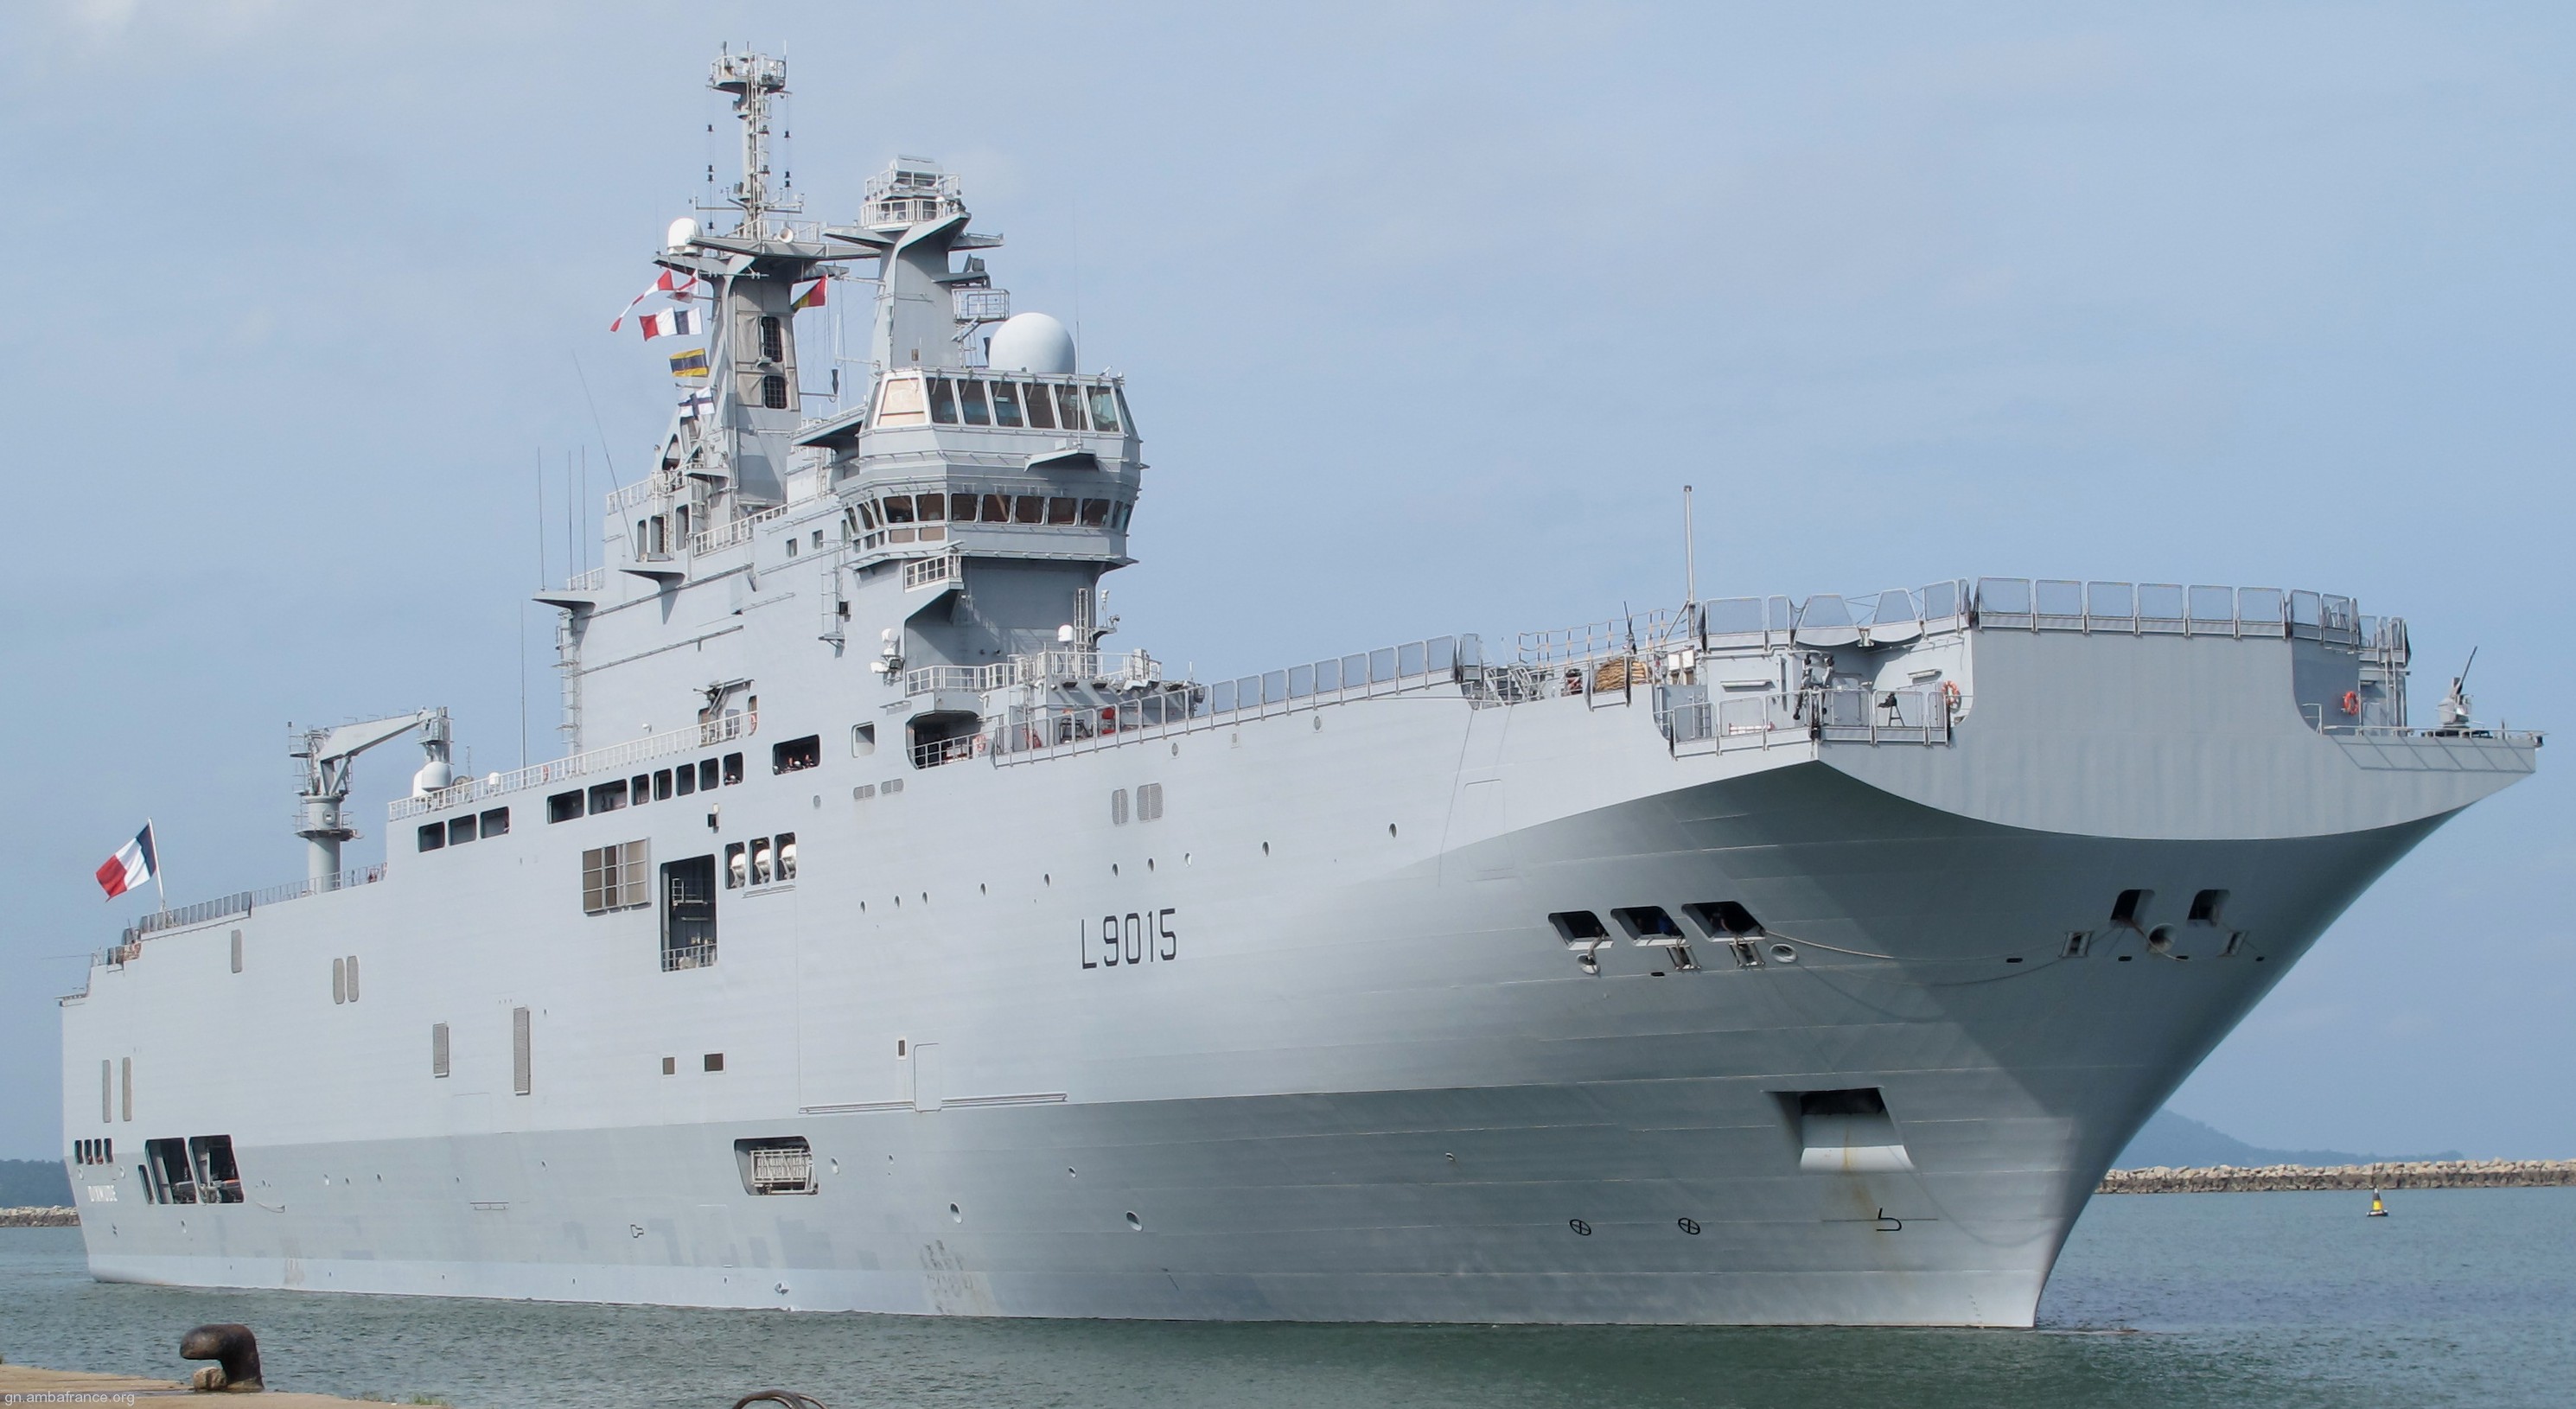 l-9015 fs dixmude mistral class amphibious assault command ship bpc french navy marine nationale 08